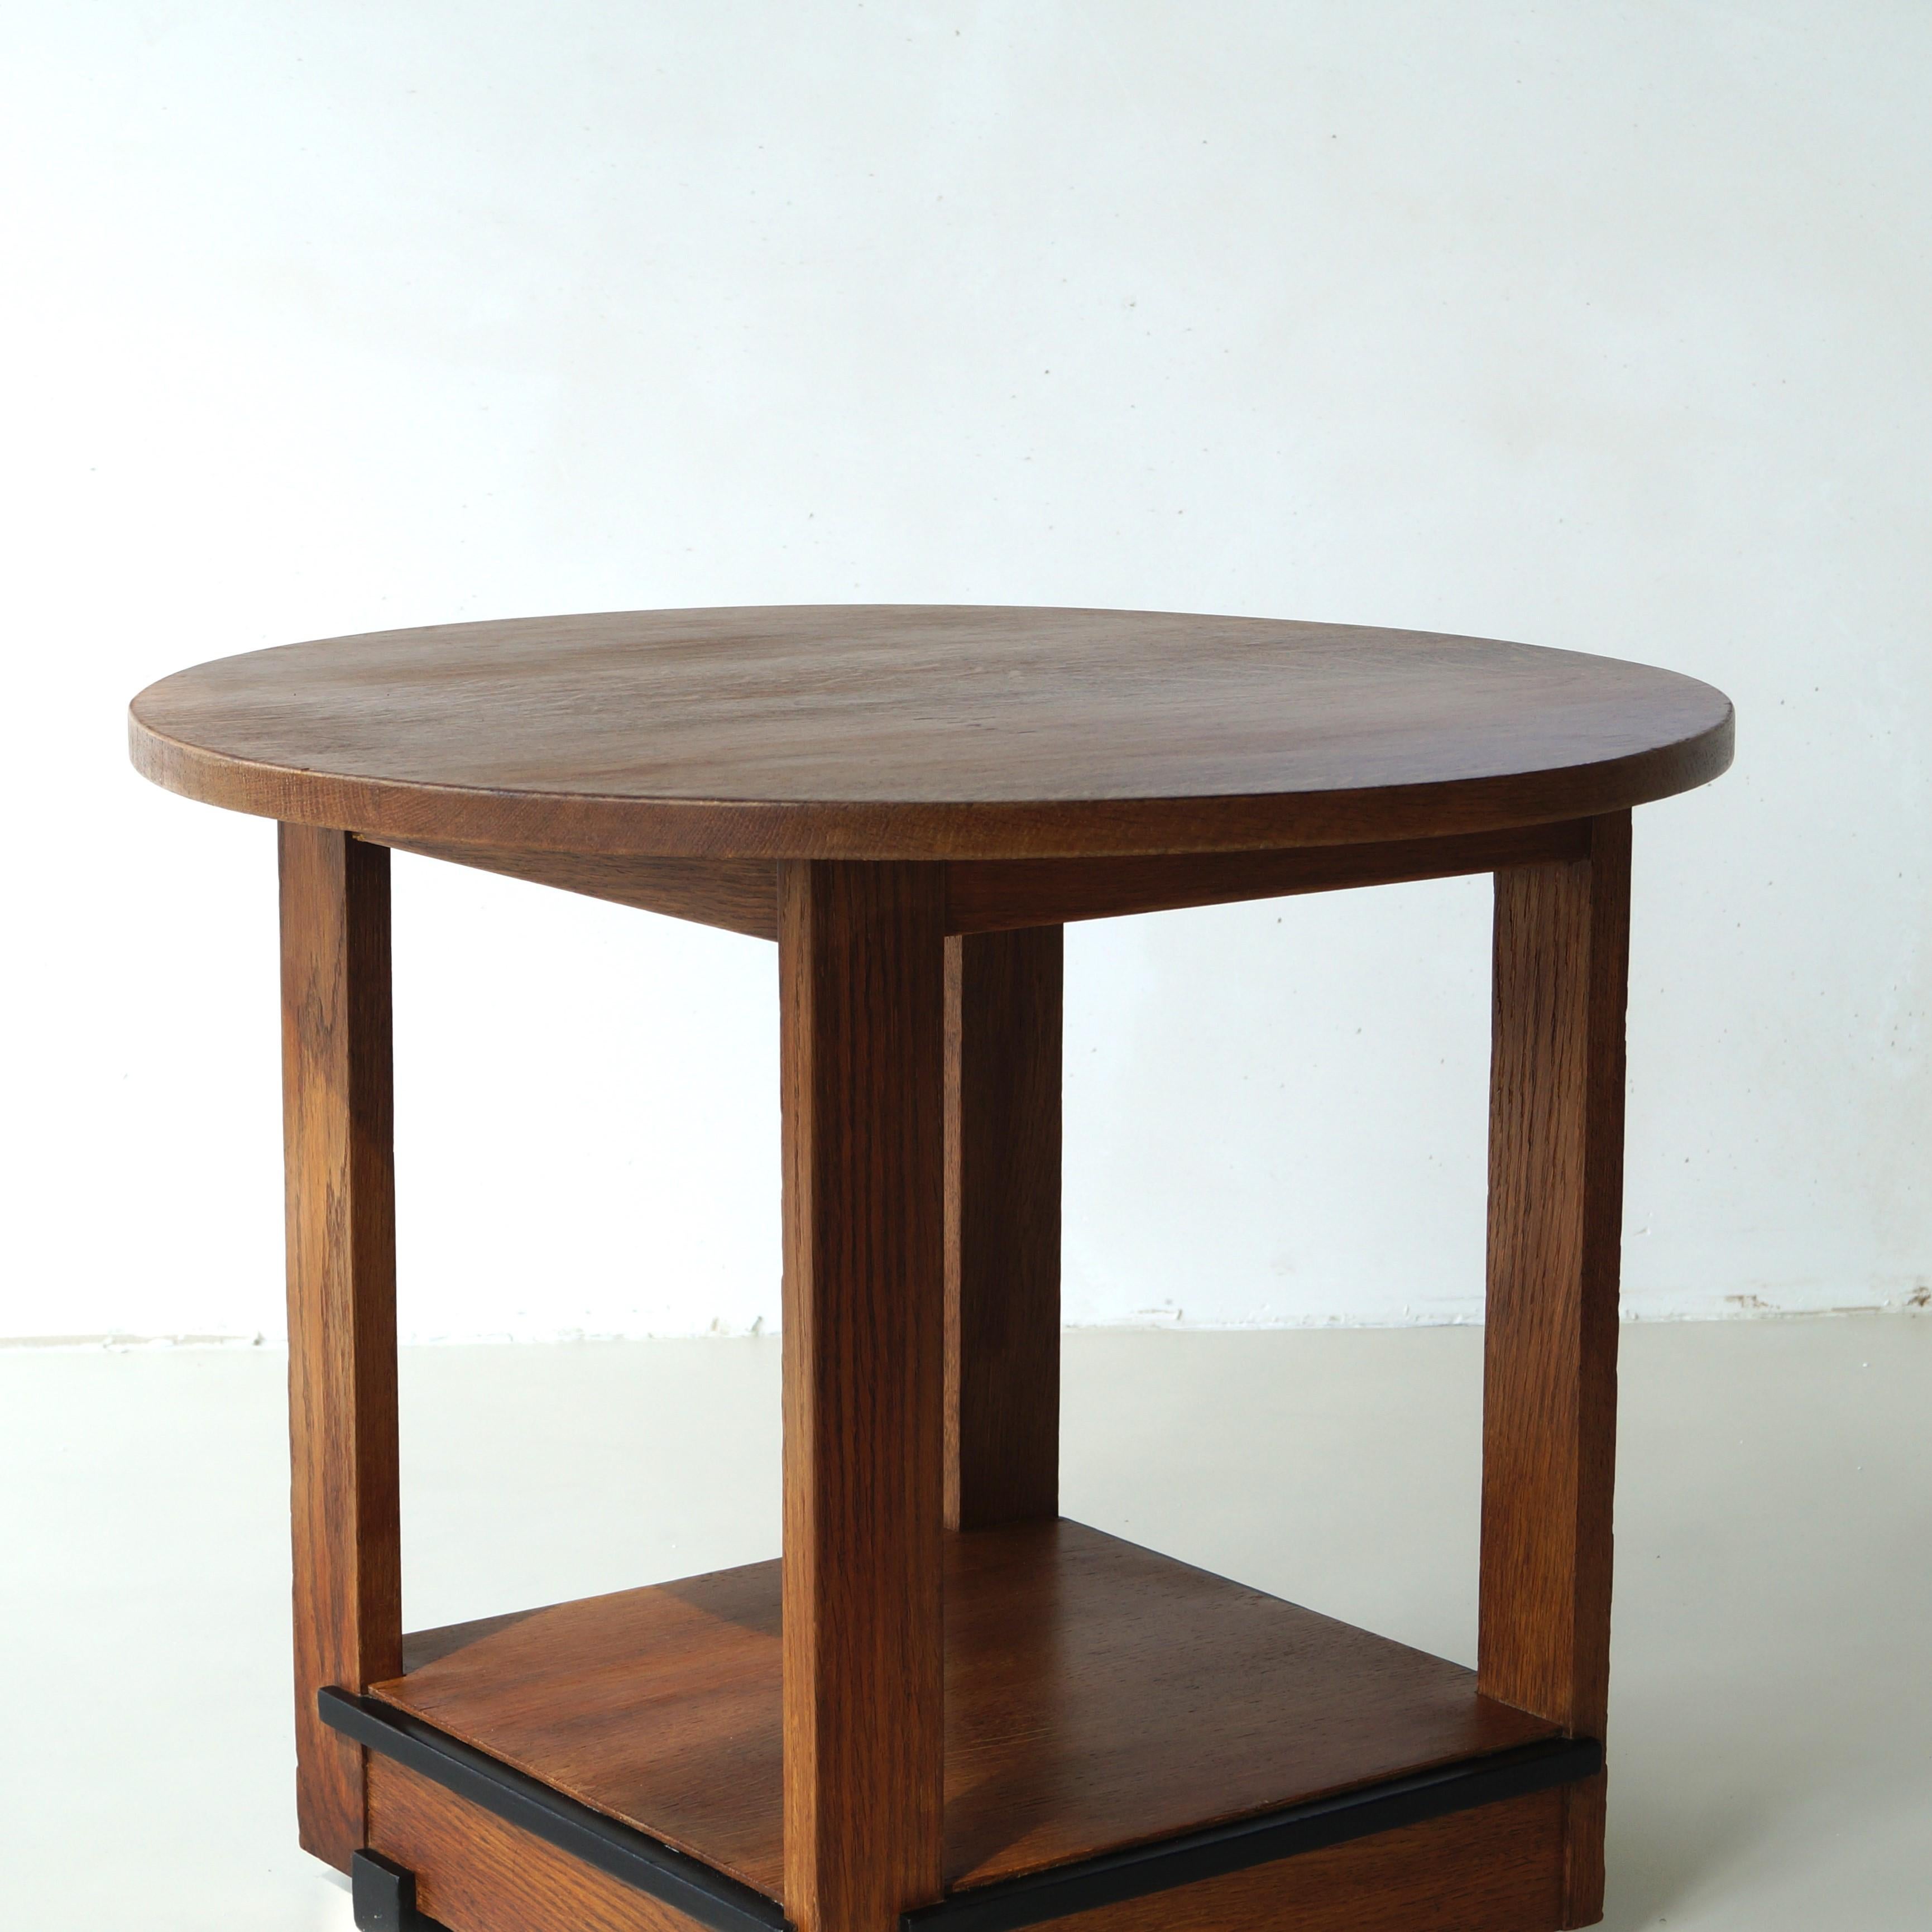 Early 20th Century Modernist Dutch Art Deco occasional table attributed to Jan Brunott, 1920s For Sale